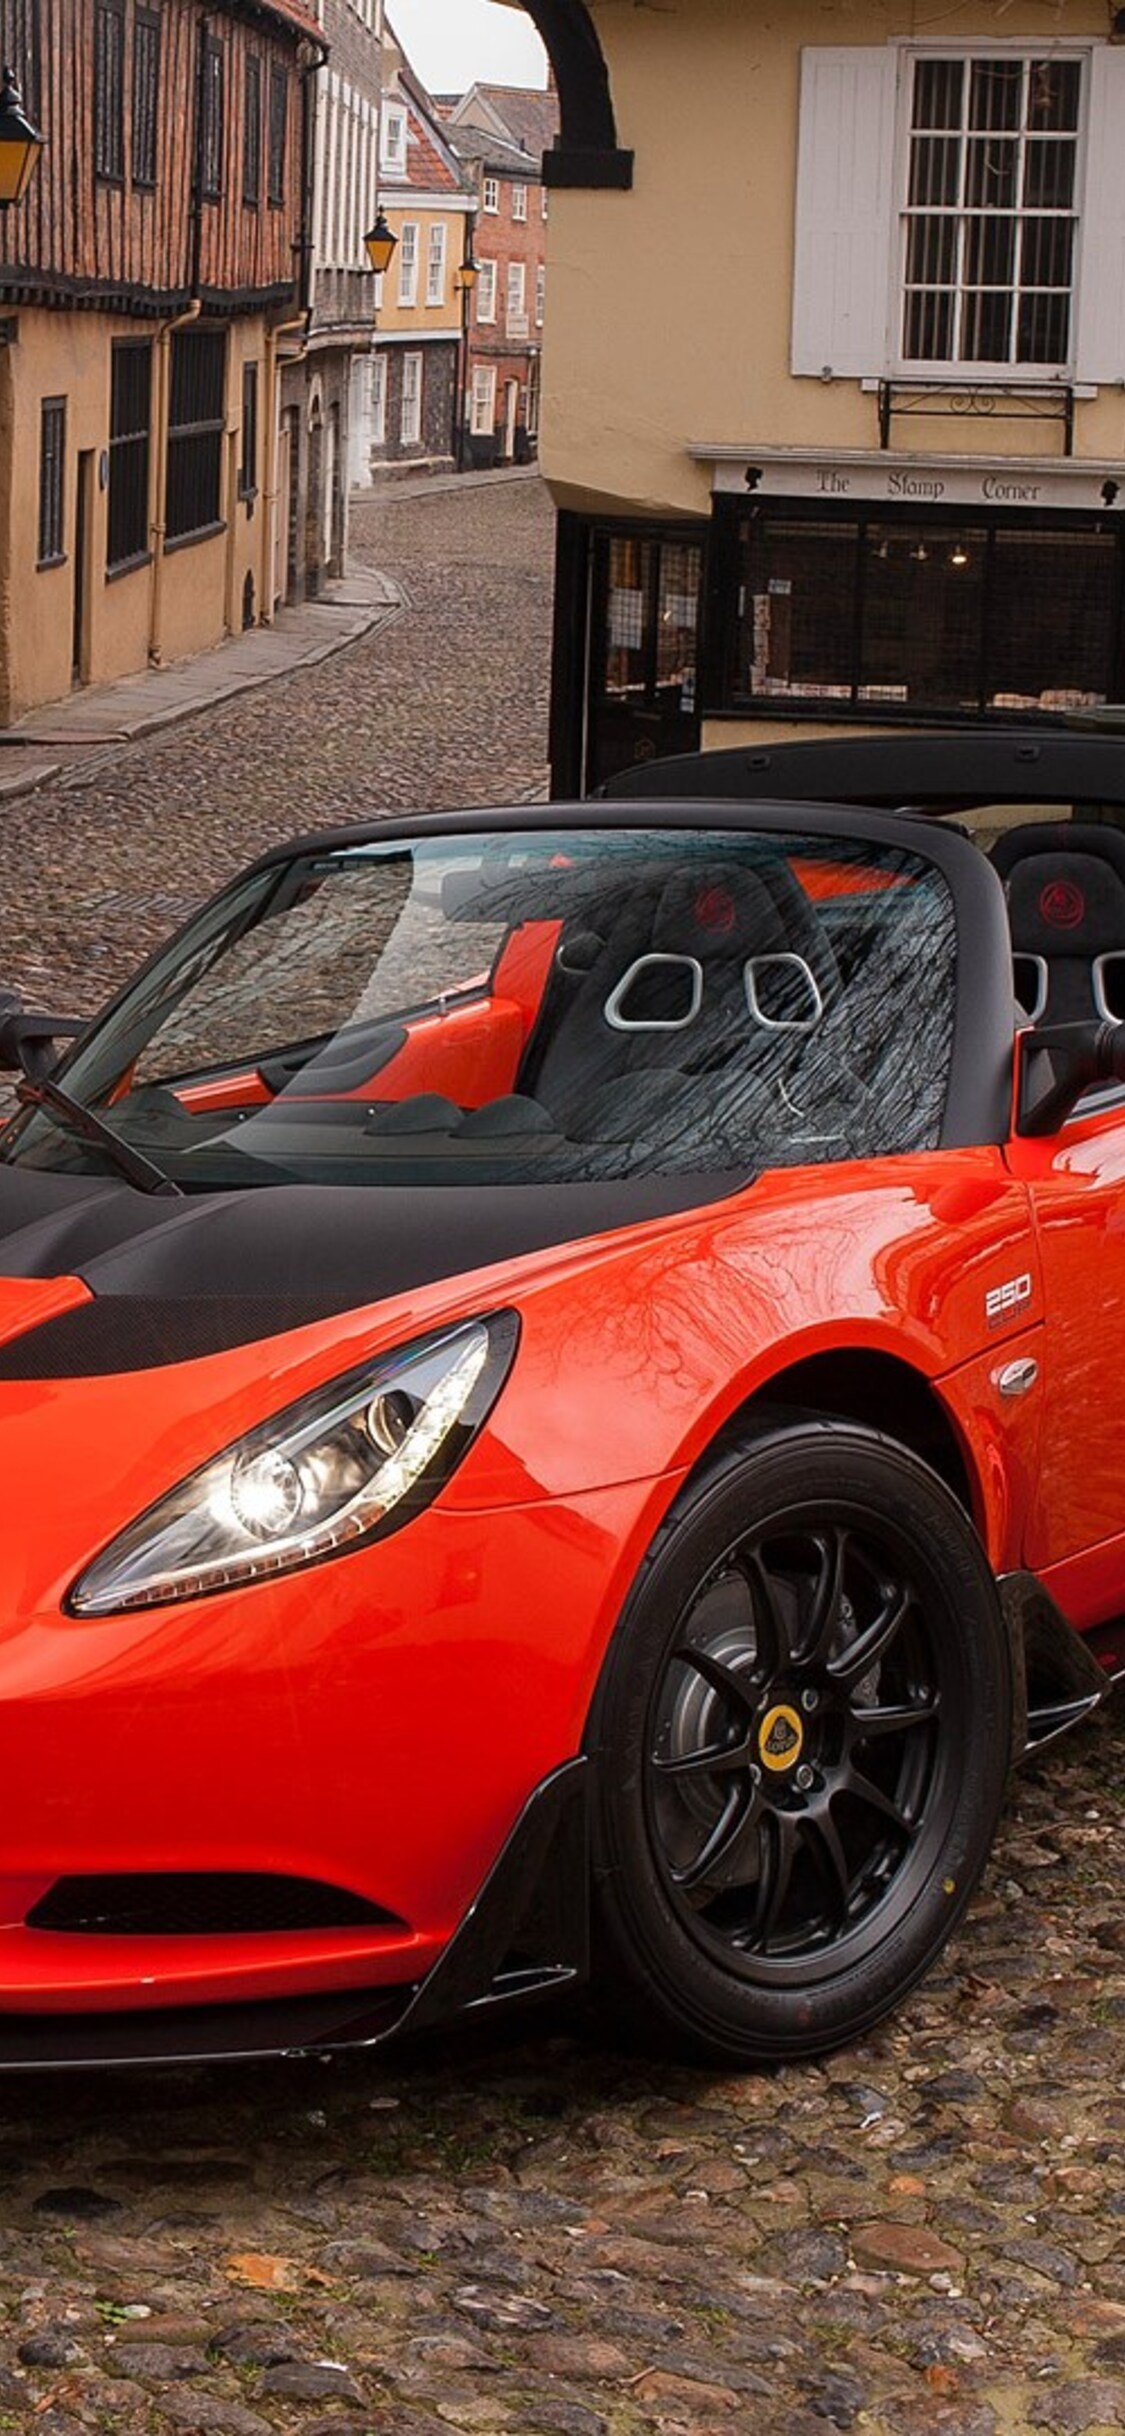 Lotus Elise, Full HD, Iconic roadster, Thrilling driving experience, 1130x2440 HD Phone